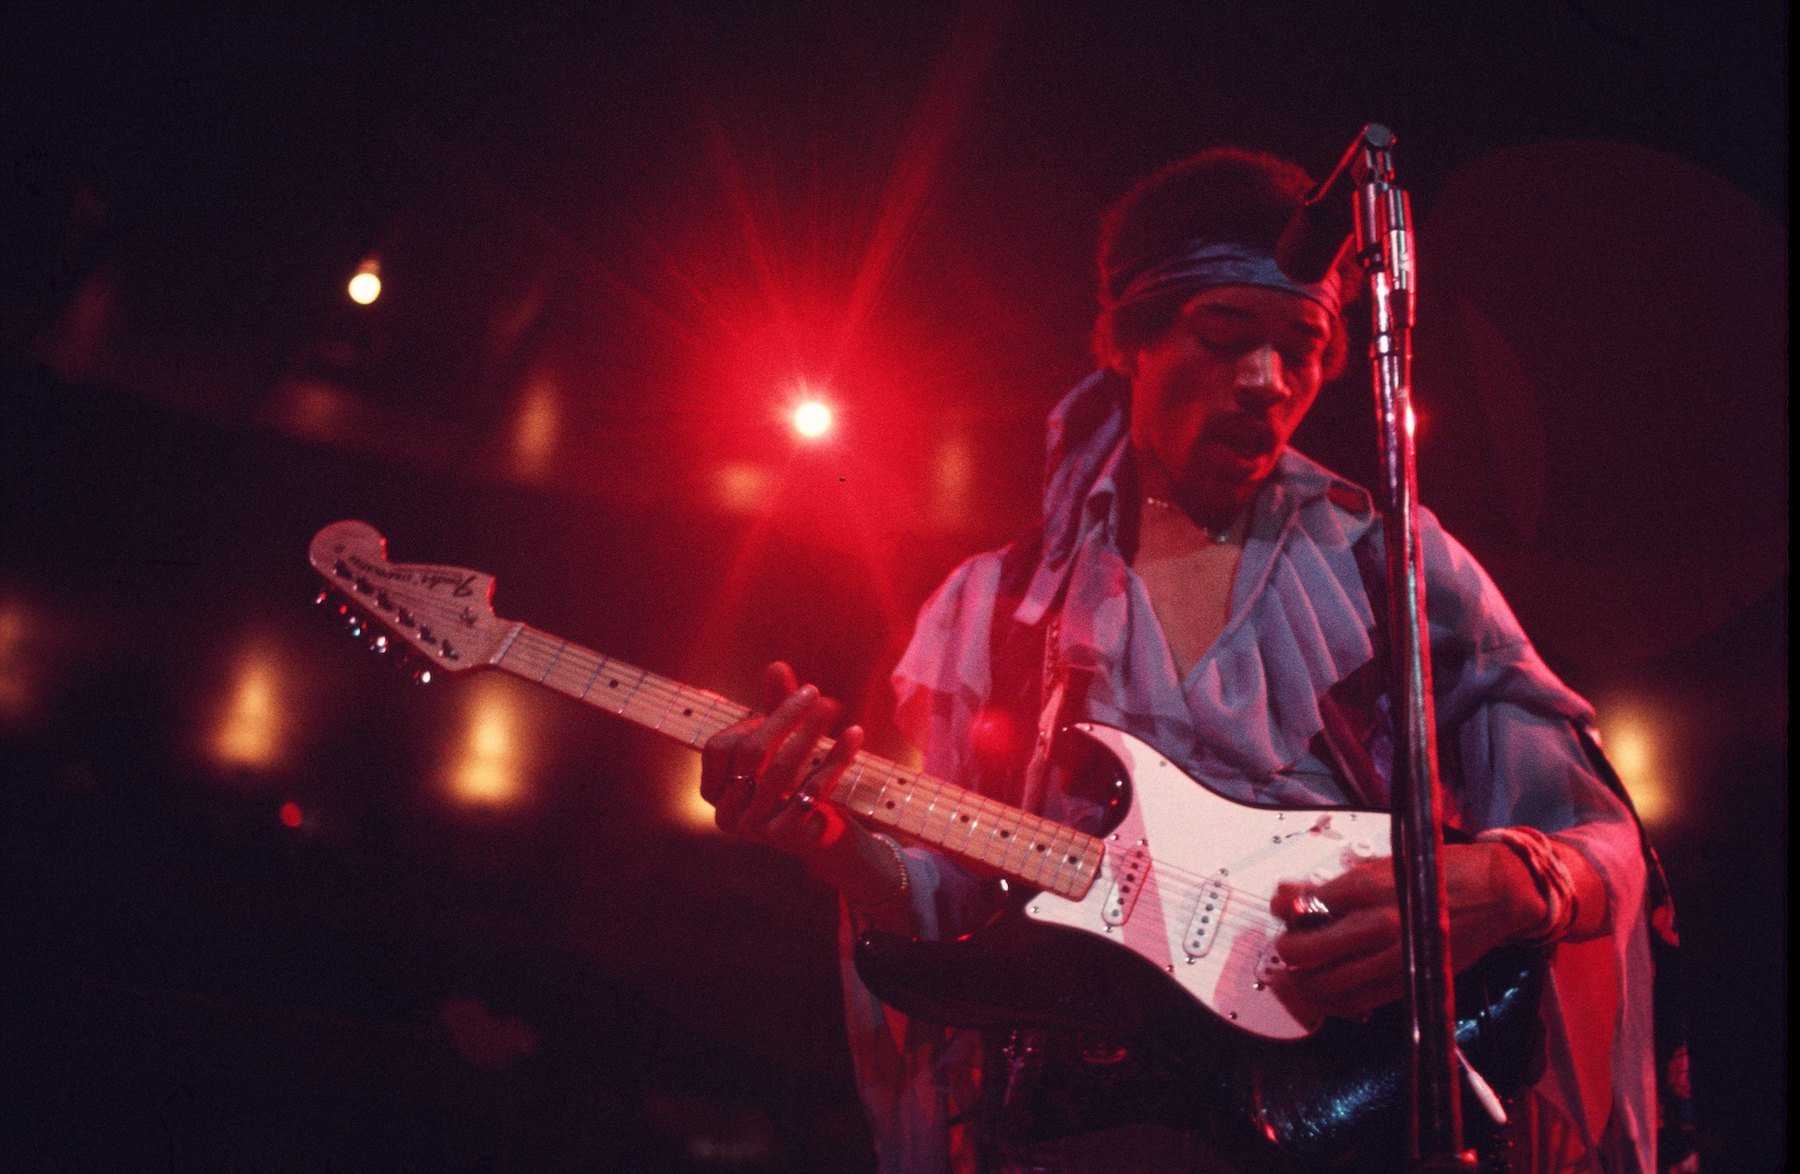 Jimi Hendrix, who squatted in buildings as a struggling musician, playing guitar on stage